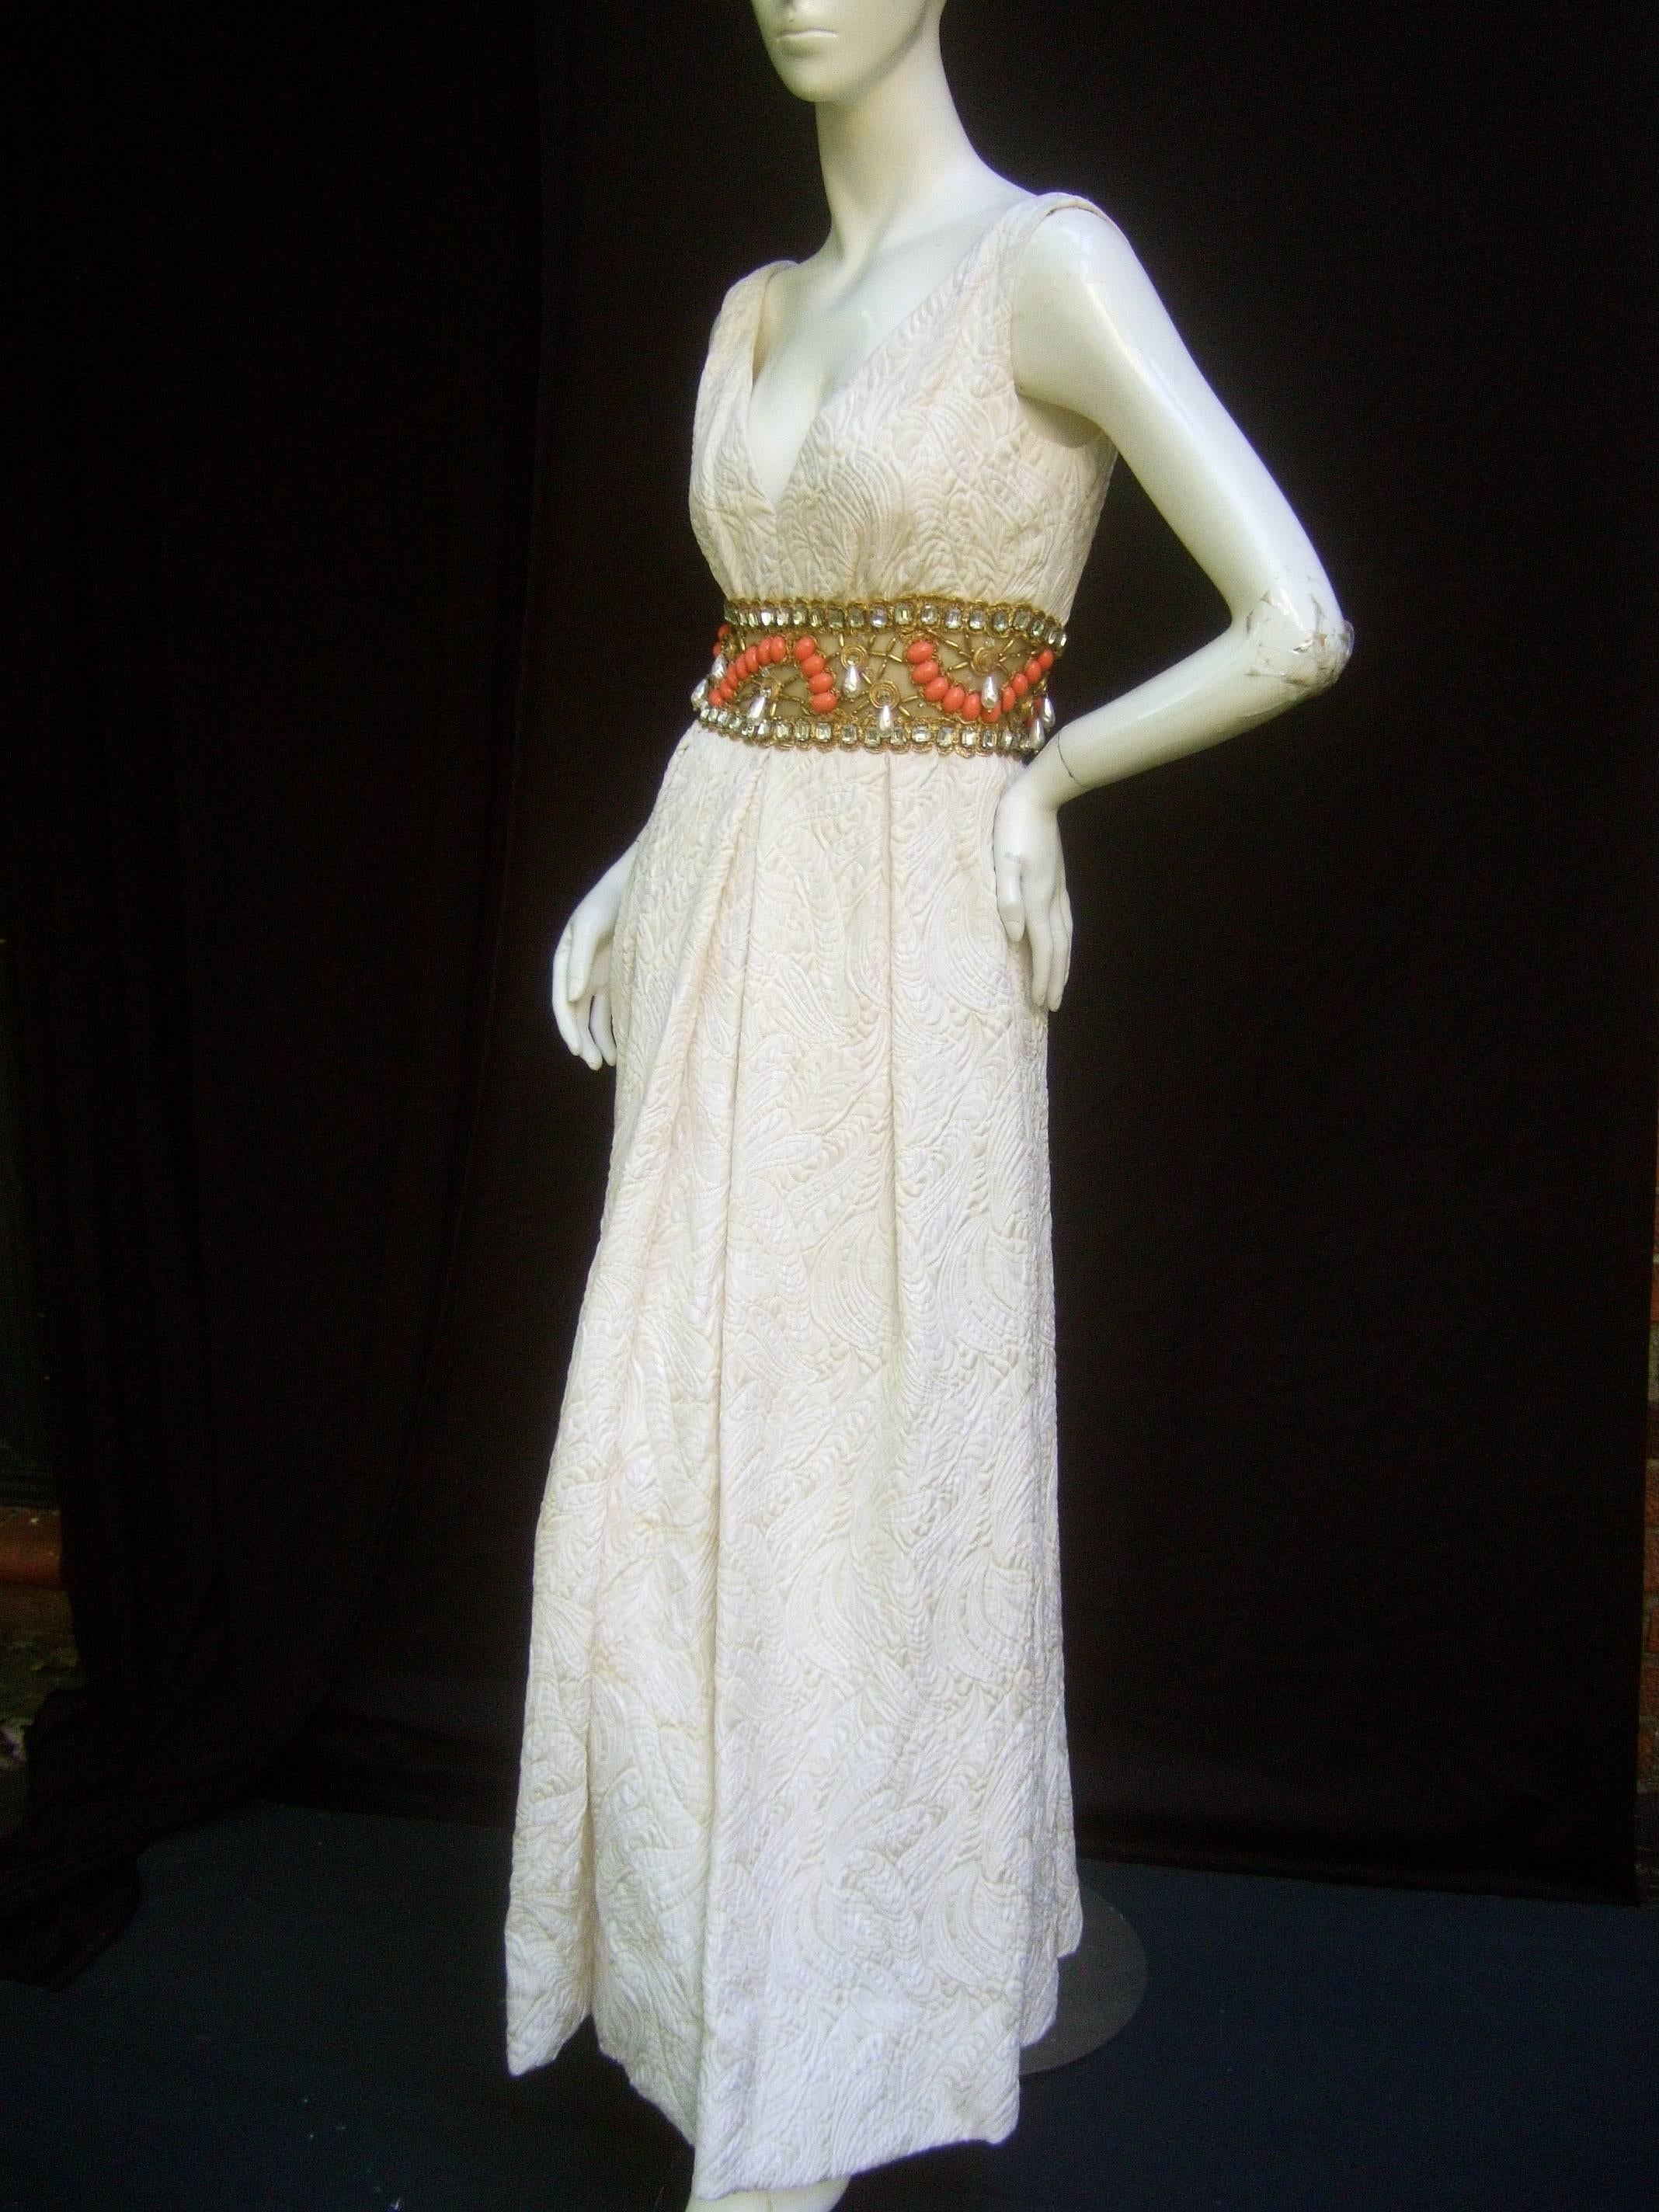 Ceil Chapman Stunning ivory brocade jeweled empire gown c 1960s
The exquisite brocade gown is designed with an elaborate 
jewel encrusted midriff; embellished with glittering crystals, 
dangling baroque tear drop resin pearls, coral lucite egg  